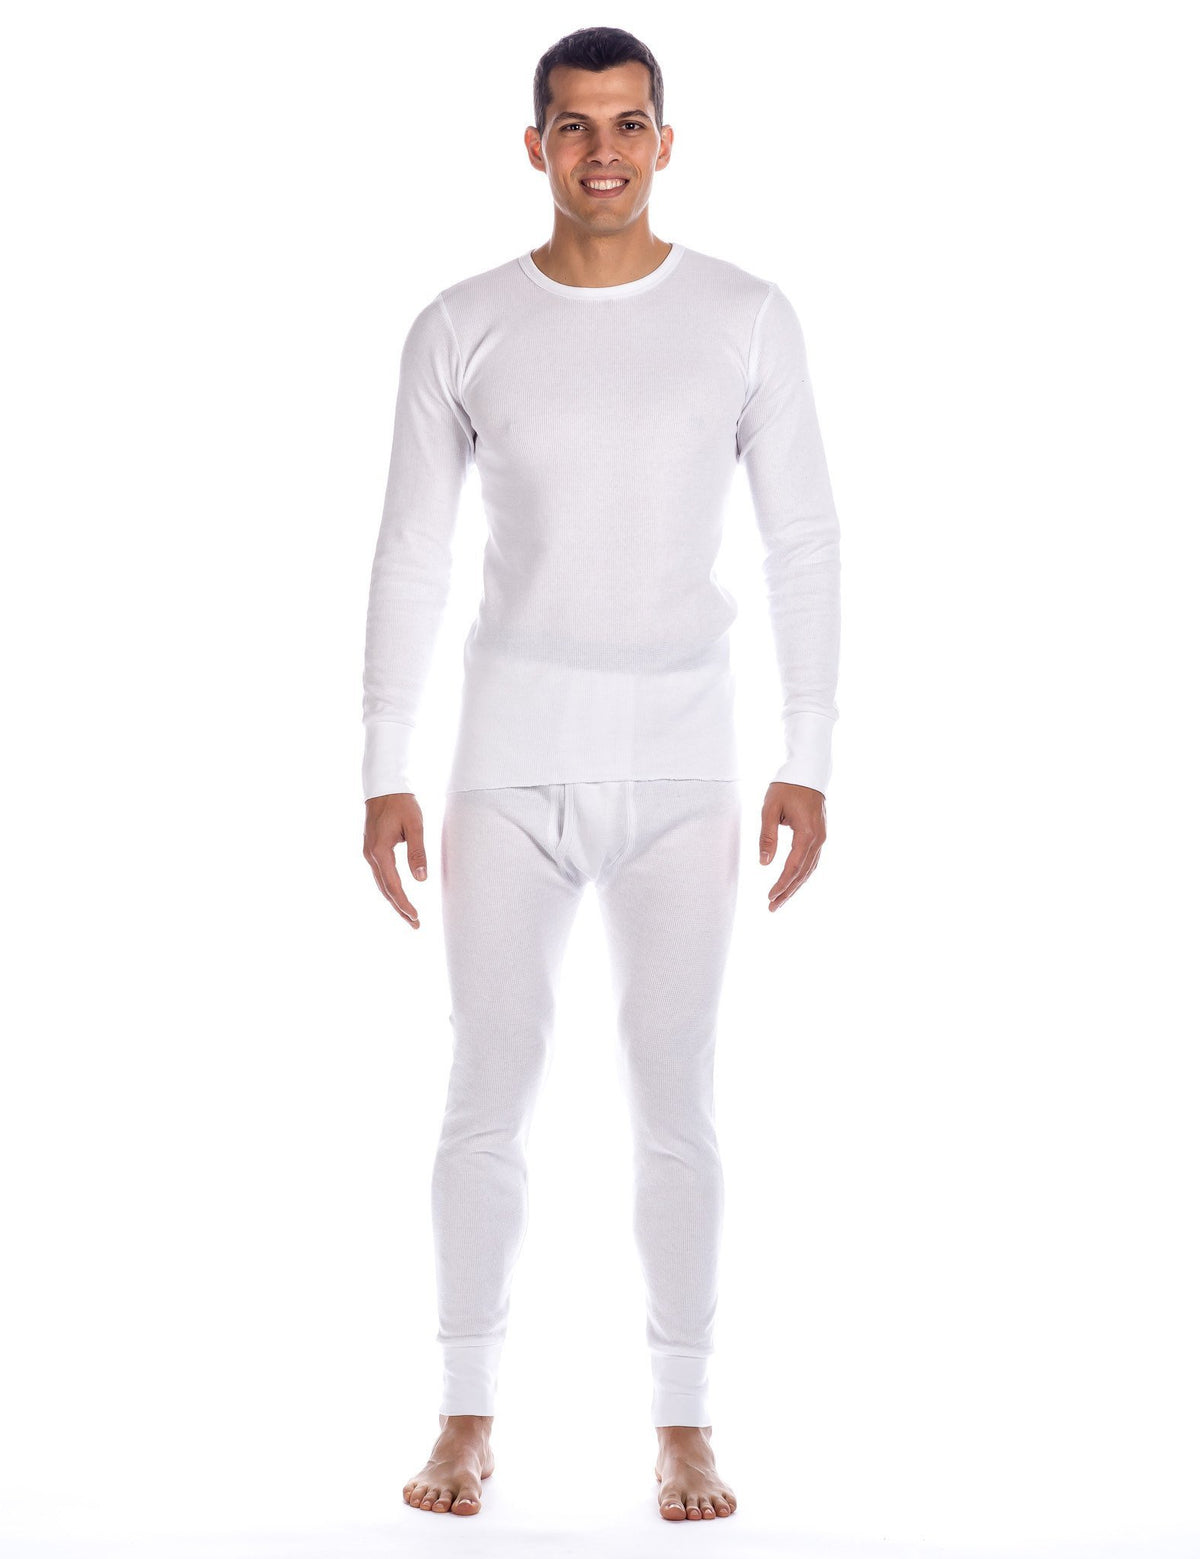 Men's Extreme Cold Waffle Knit Thermal Top and Bottom Set - White